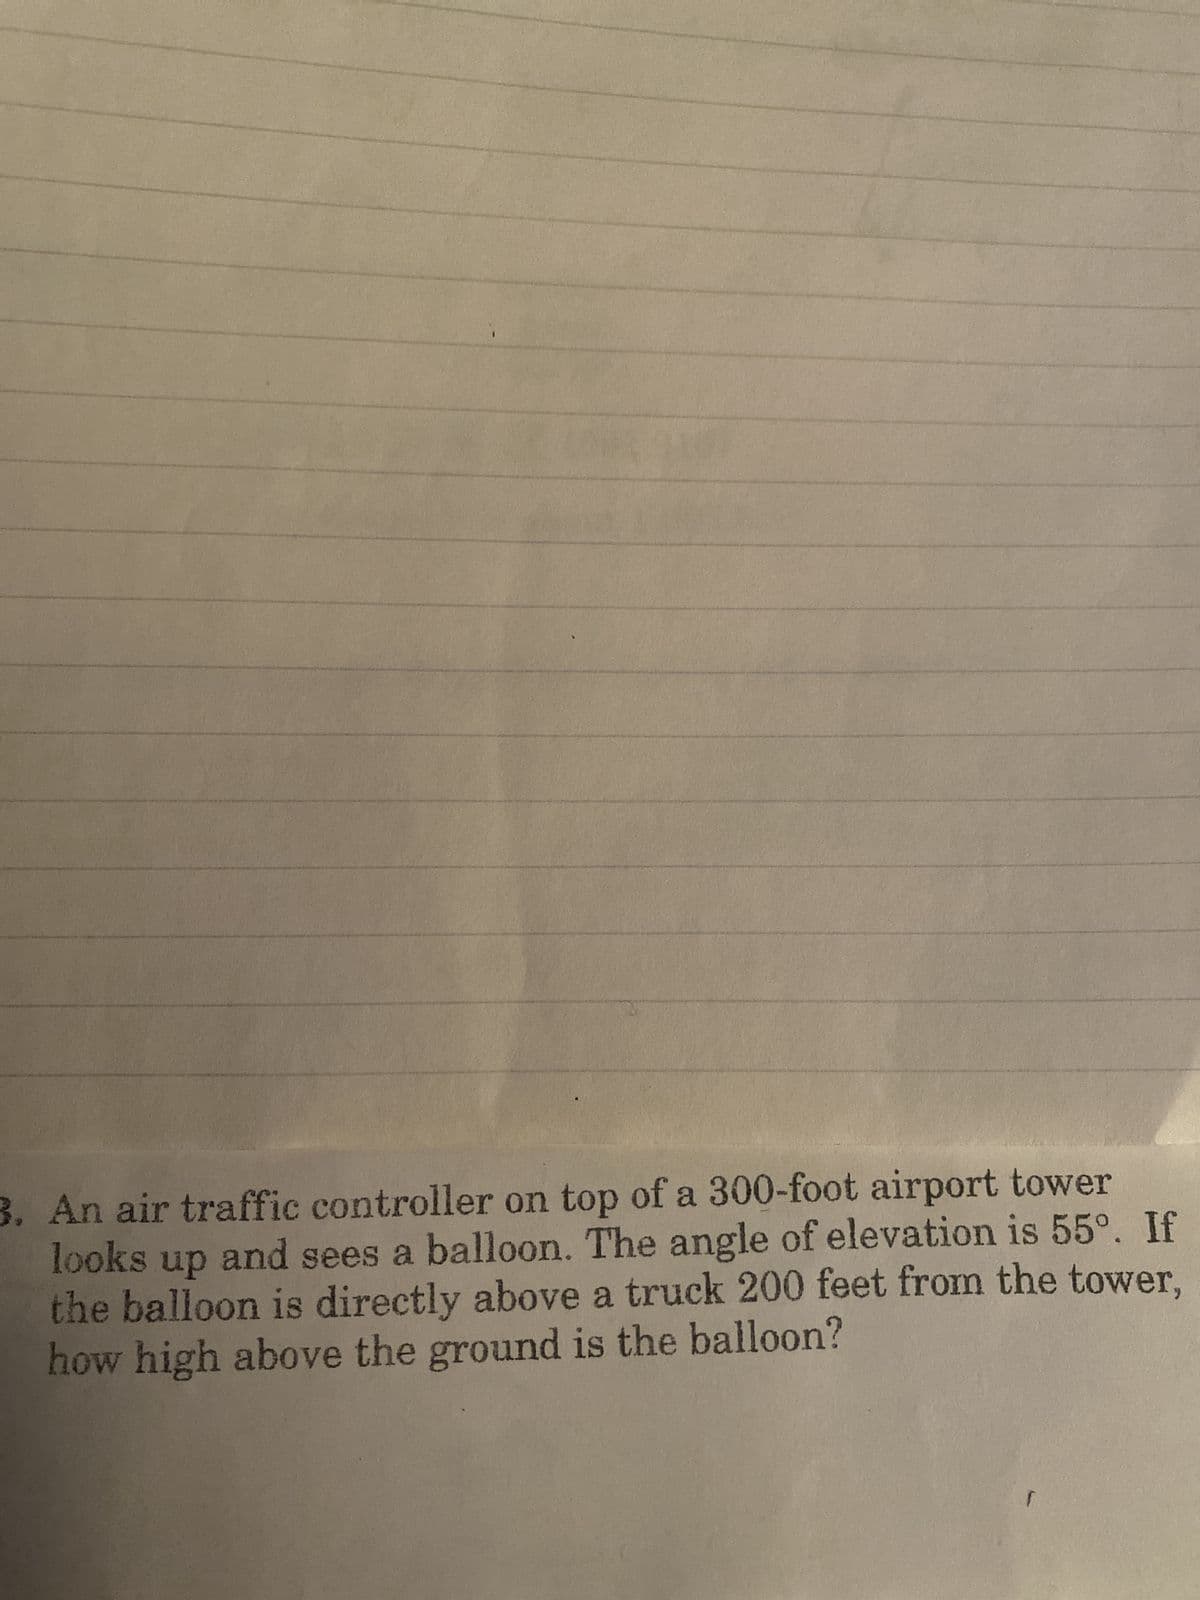 3. An air traffic controller on top of a 300-foot airport tower
looks
up
and sees a balloon. The angle of elevation is 55°. If
the balloon is directly above a truck 200 feet from the tower,
how high above the ground is the balloon?
